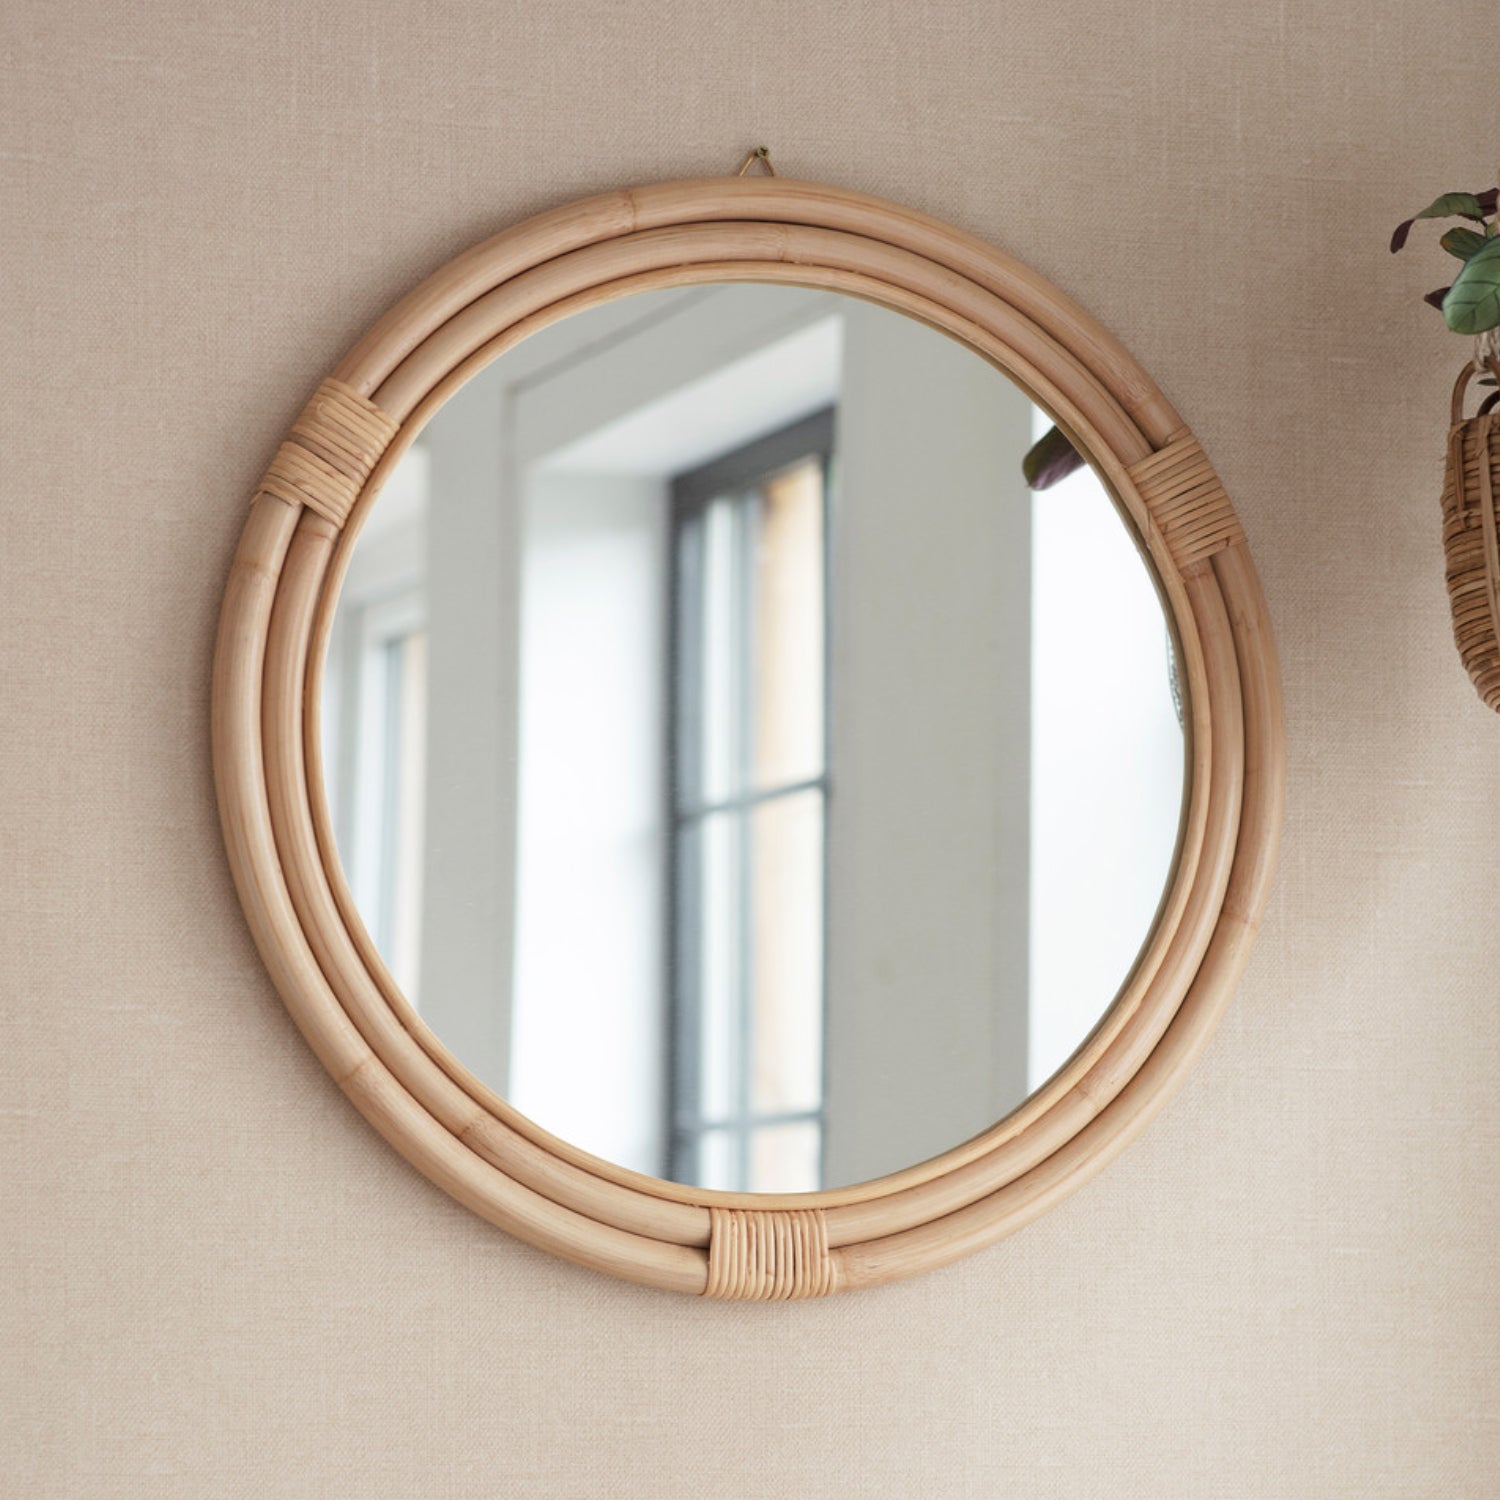 Mayfield Wall Mirror by Garden Trading - Rattan